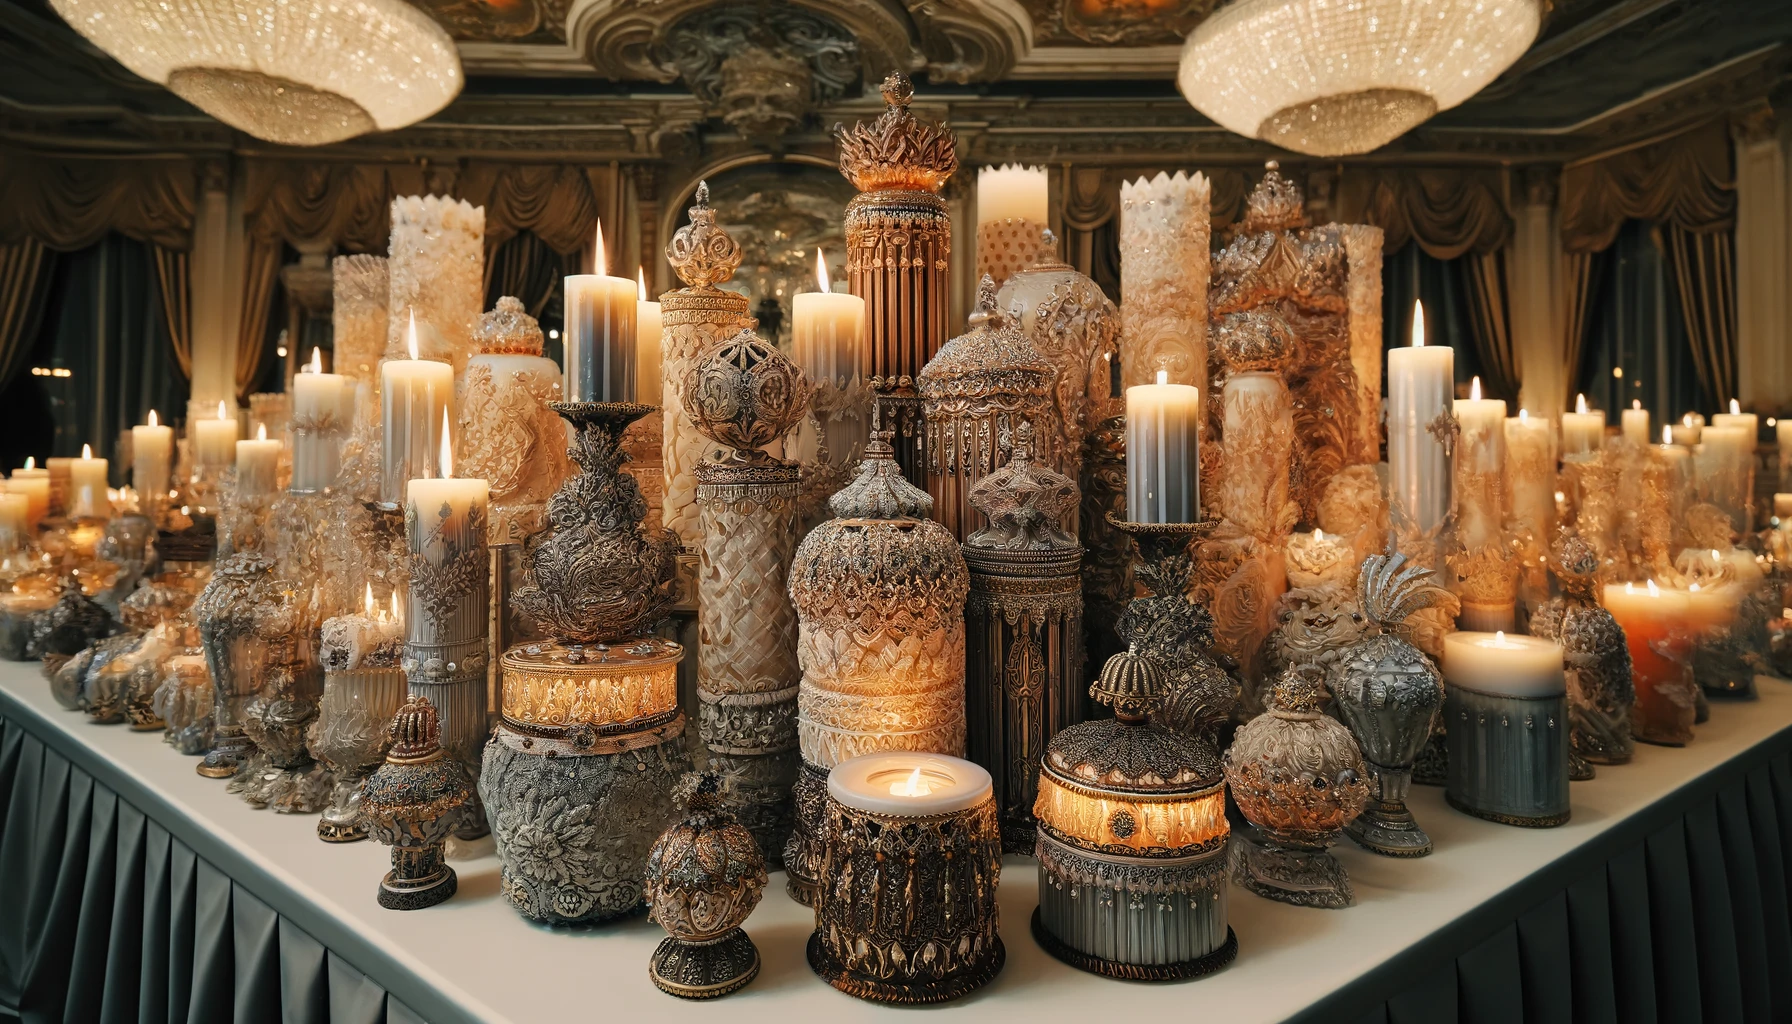 Decorative Candles - beeswax candles